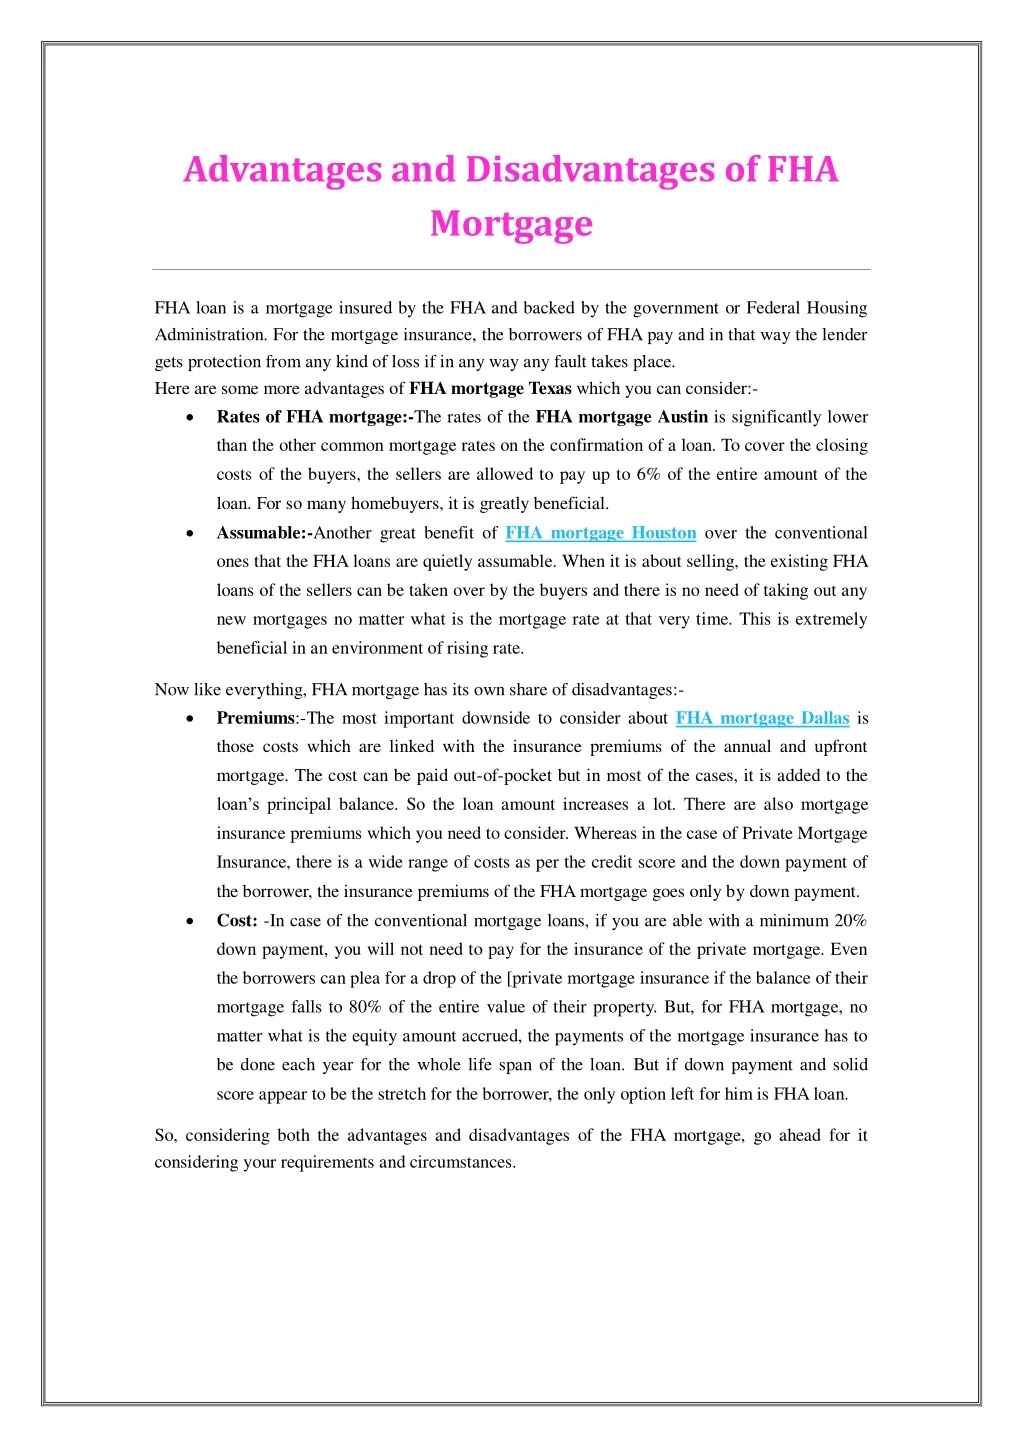 advantages and disadvantages of fha mortgage